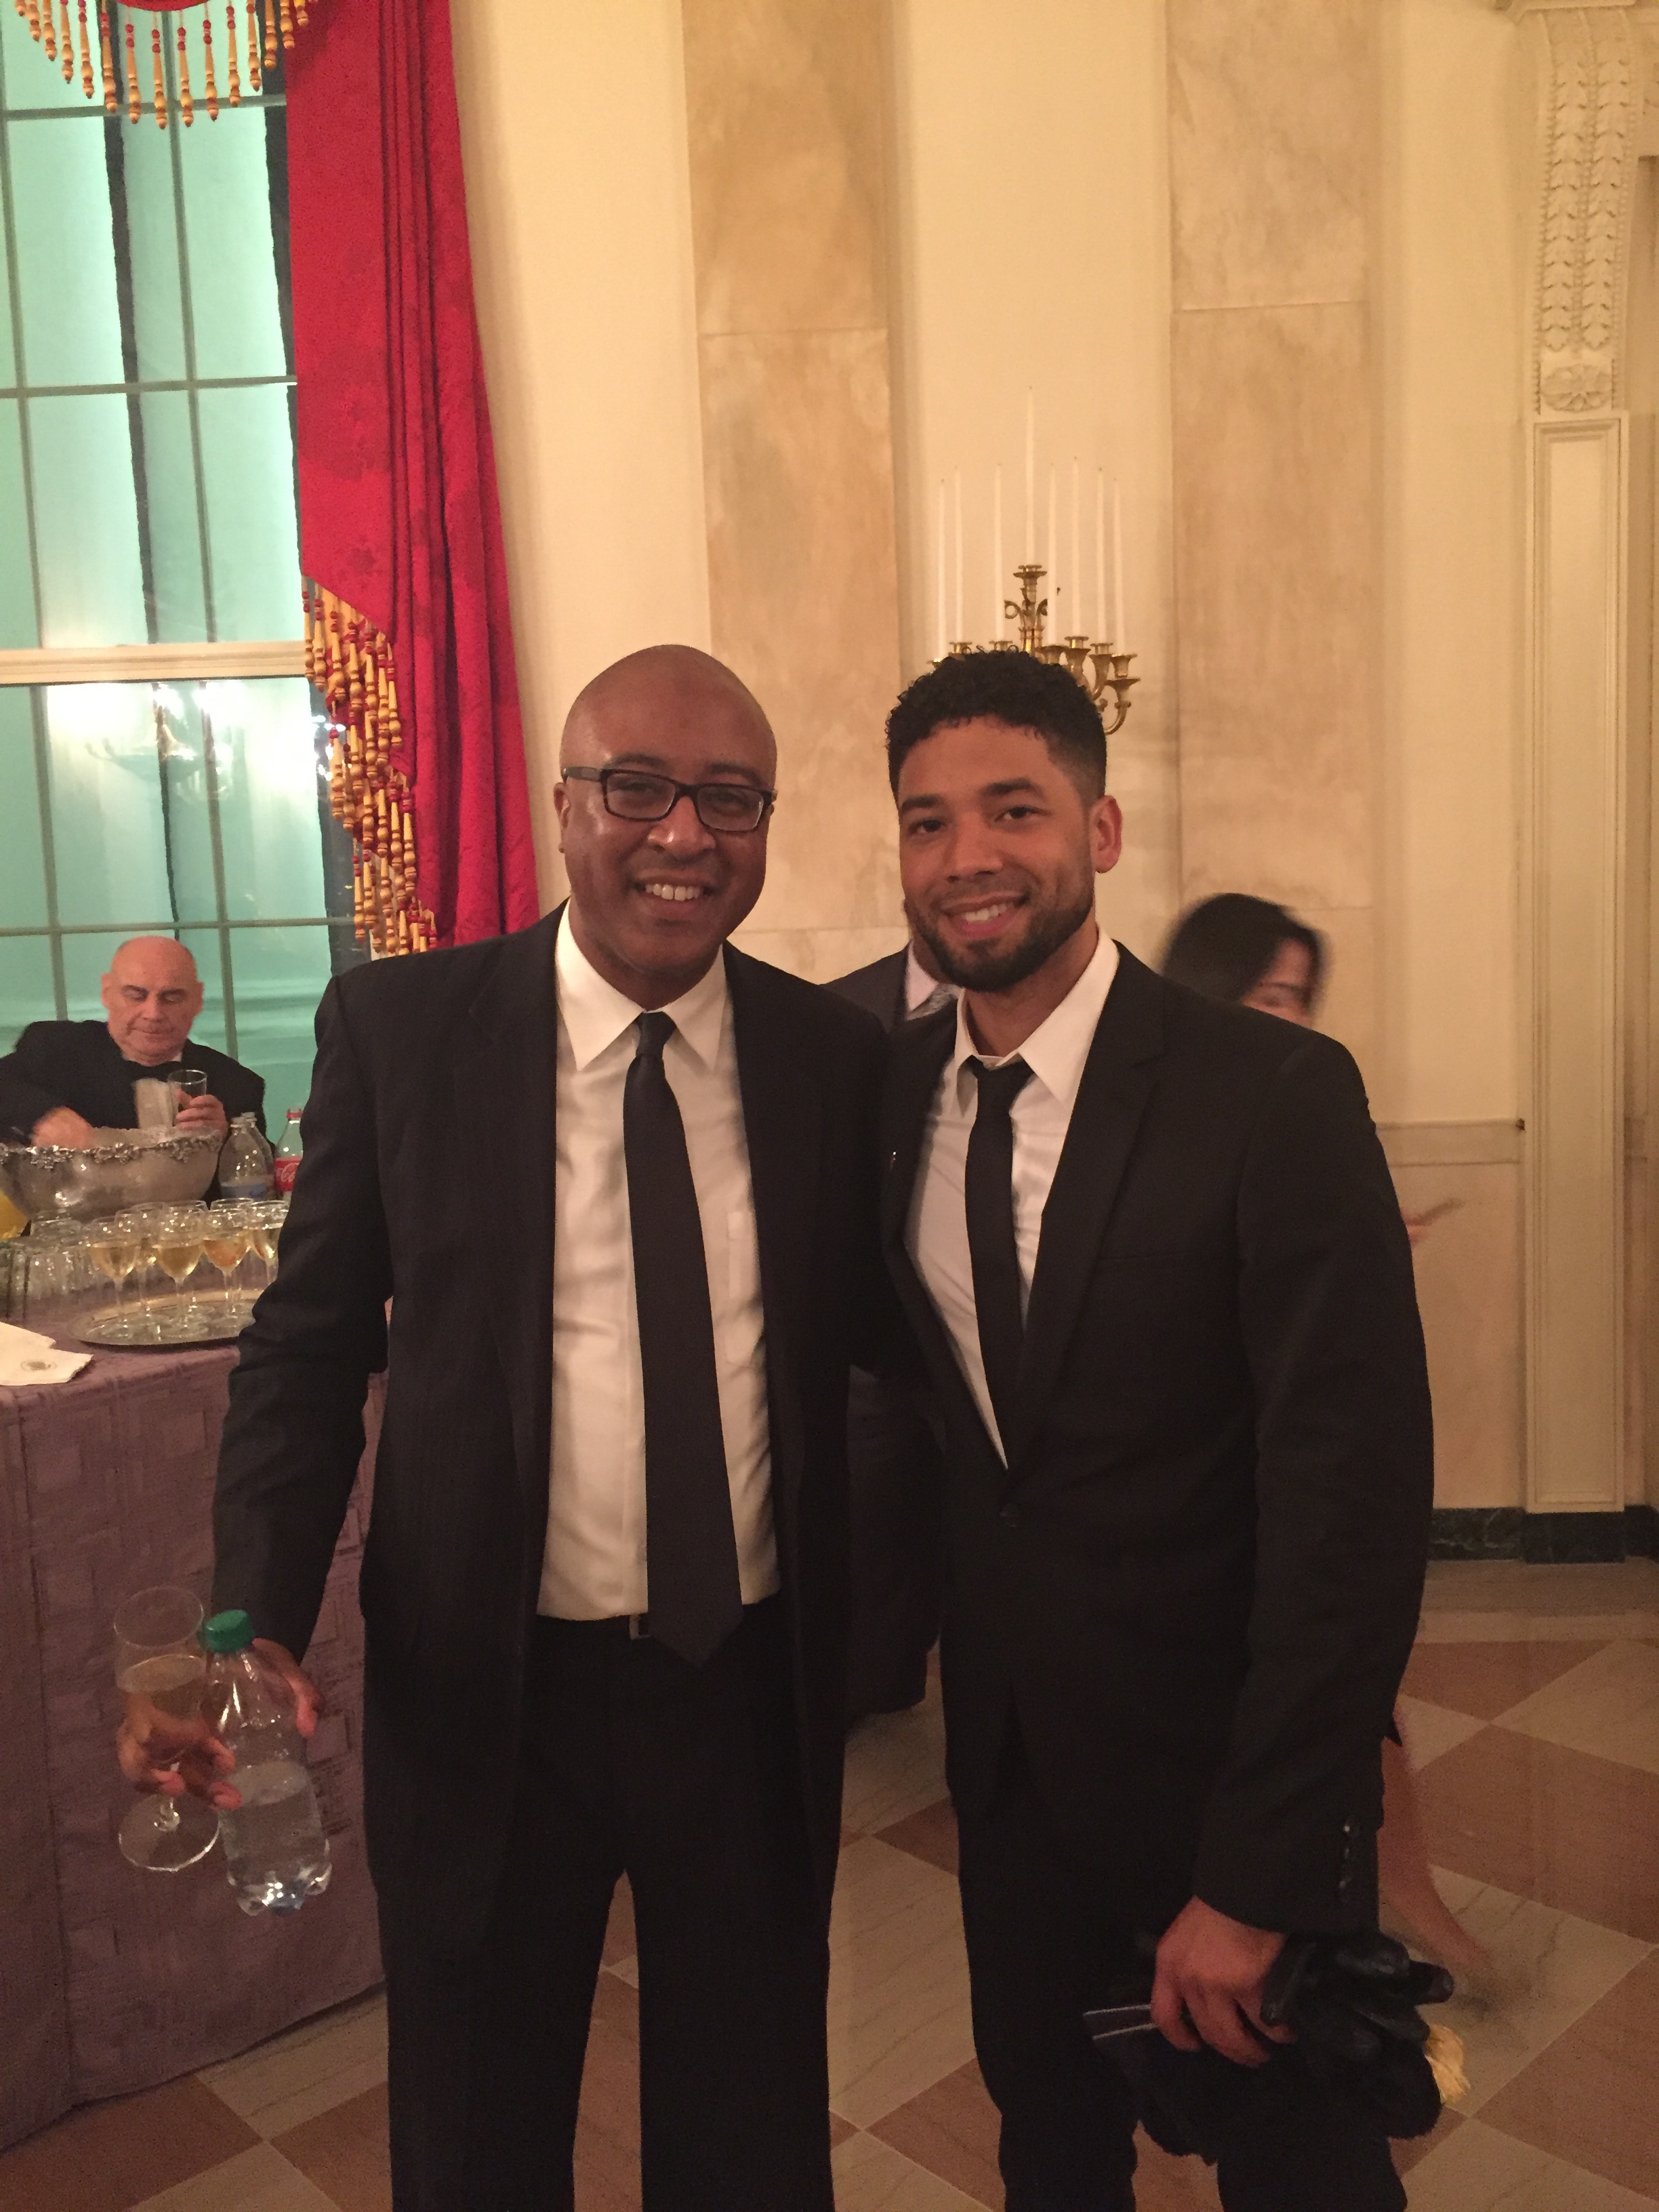 With Jussie Smollett in The White House